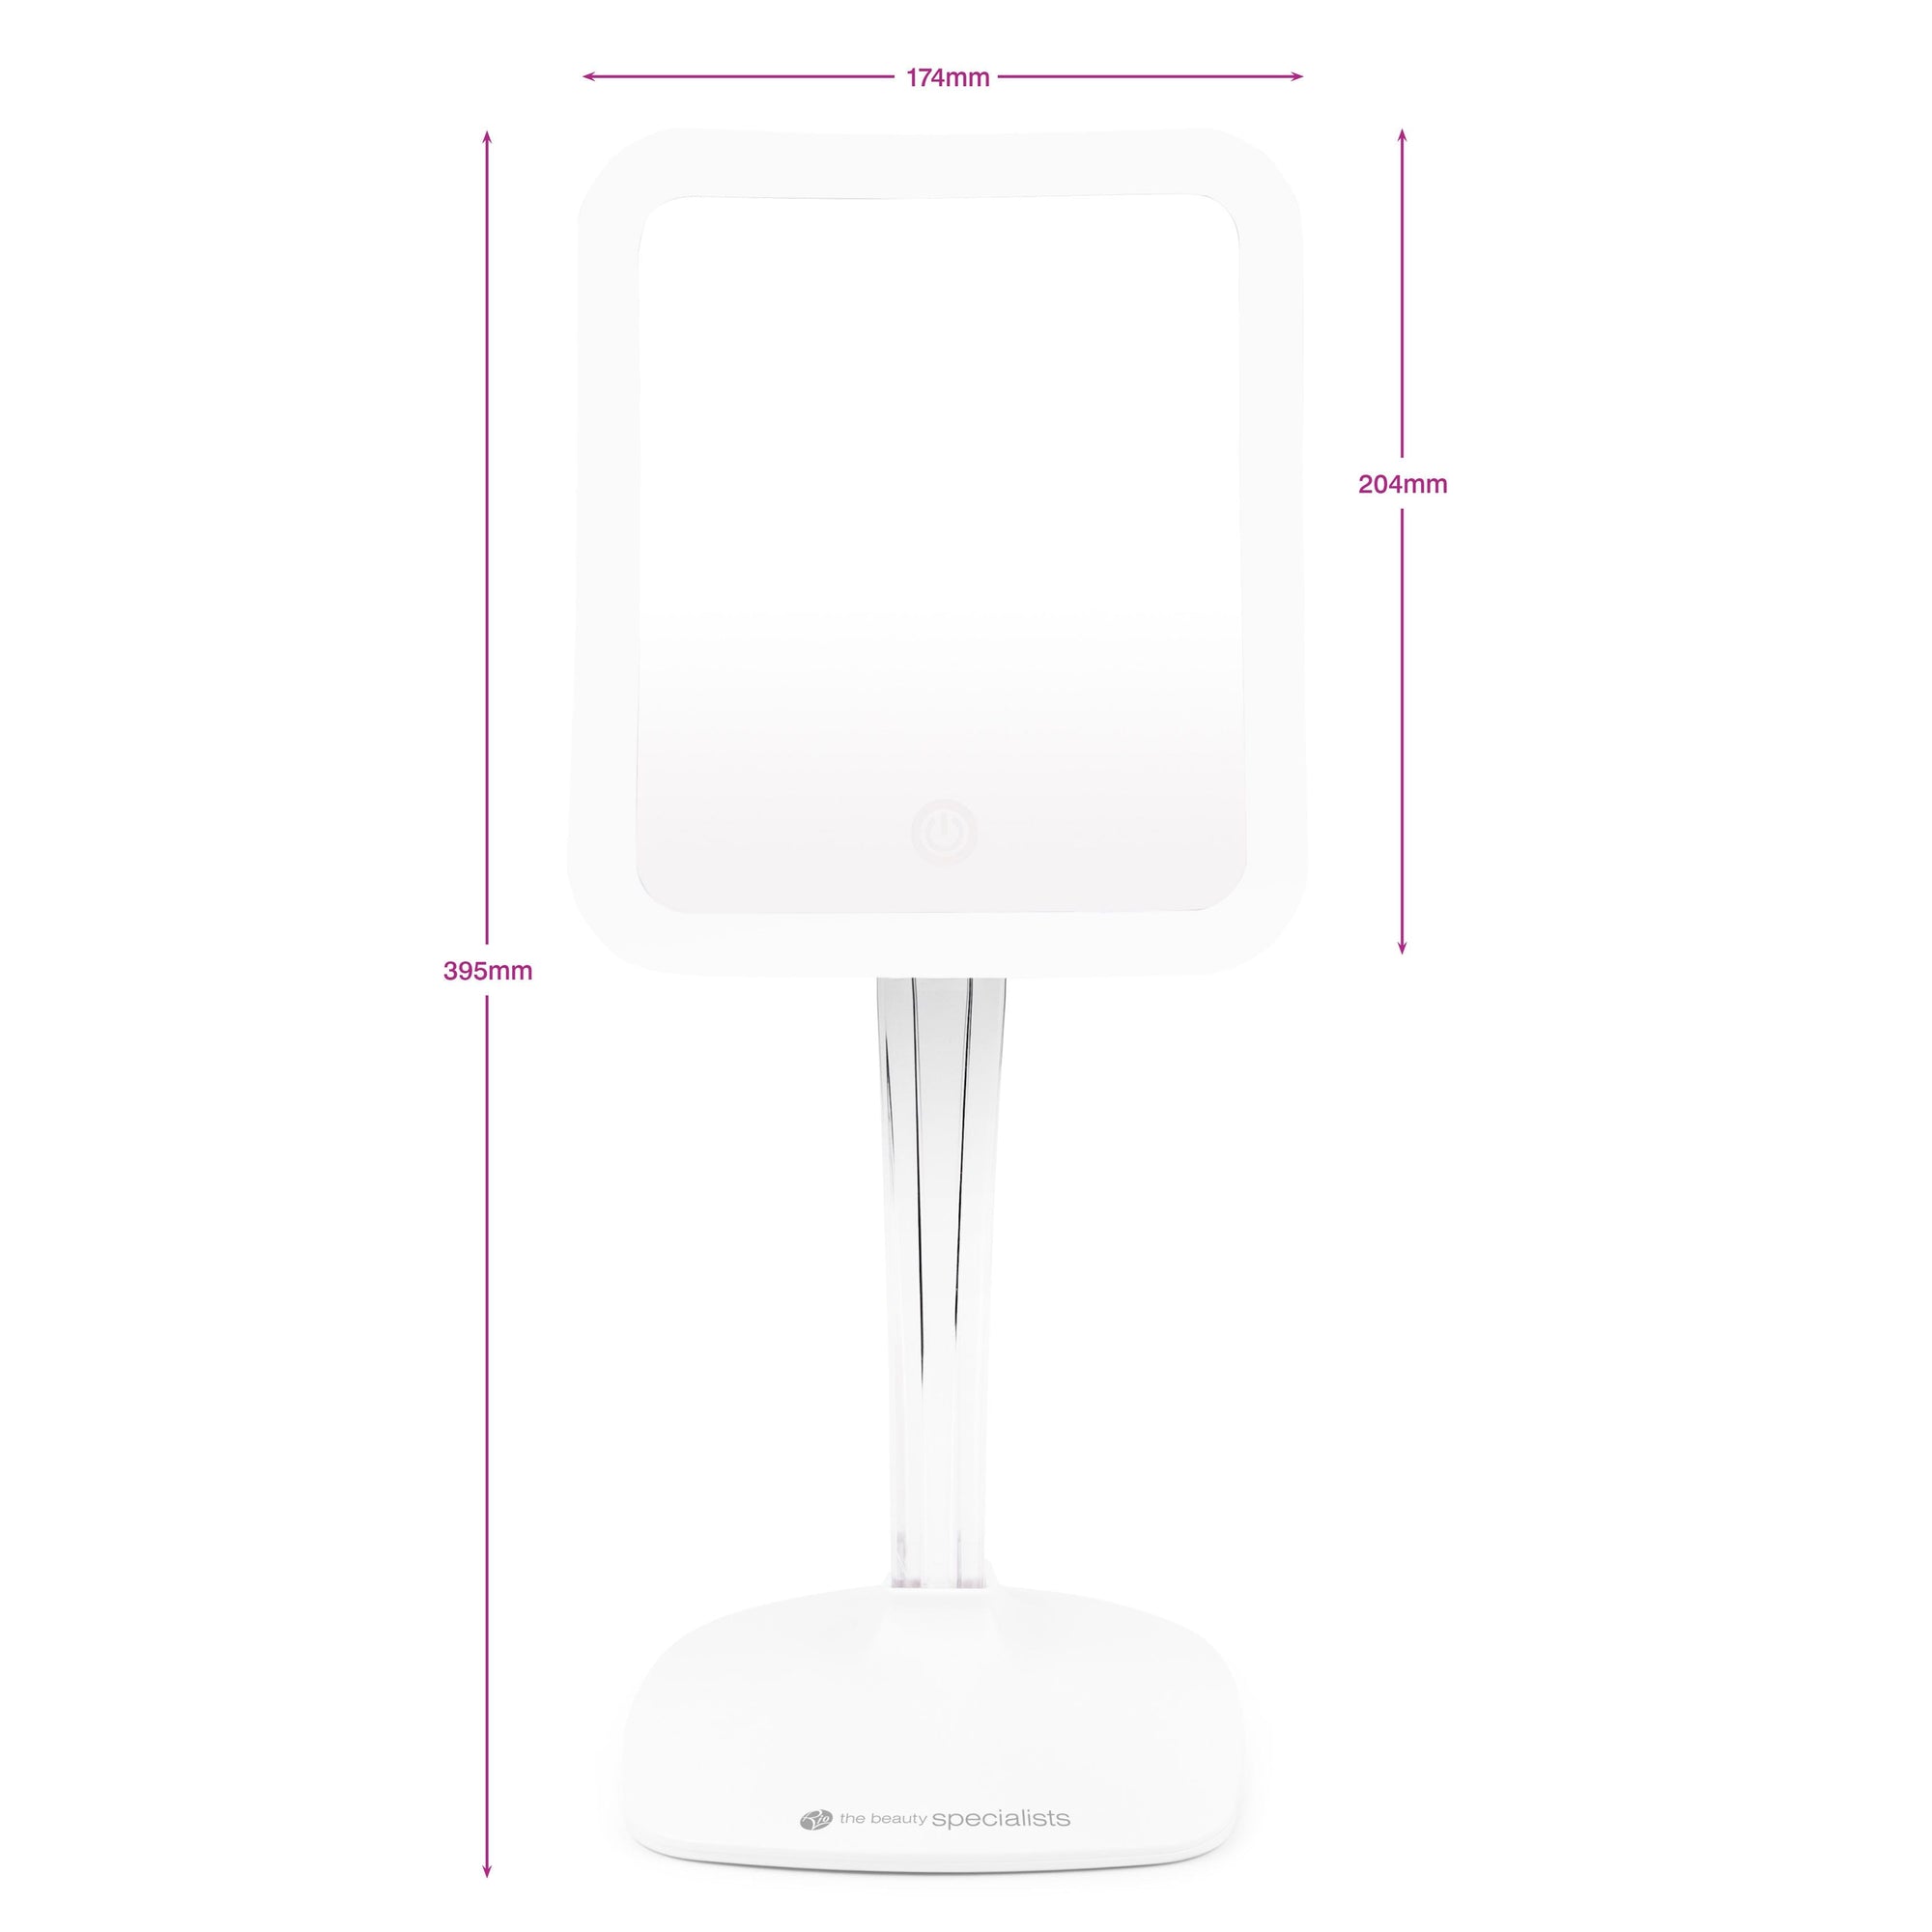 elegance 7x magnification make up mirror with arrows labelling height 395mm width 174mm and mirror height 204mm